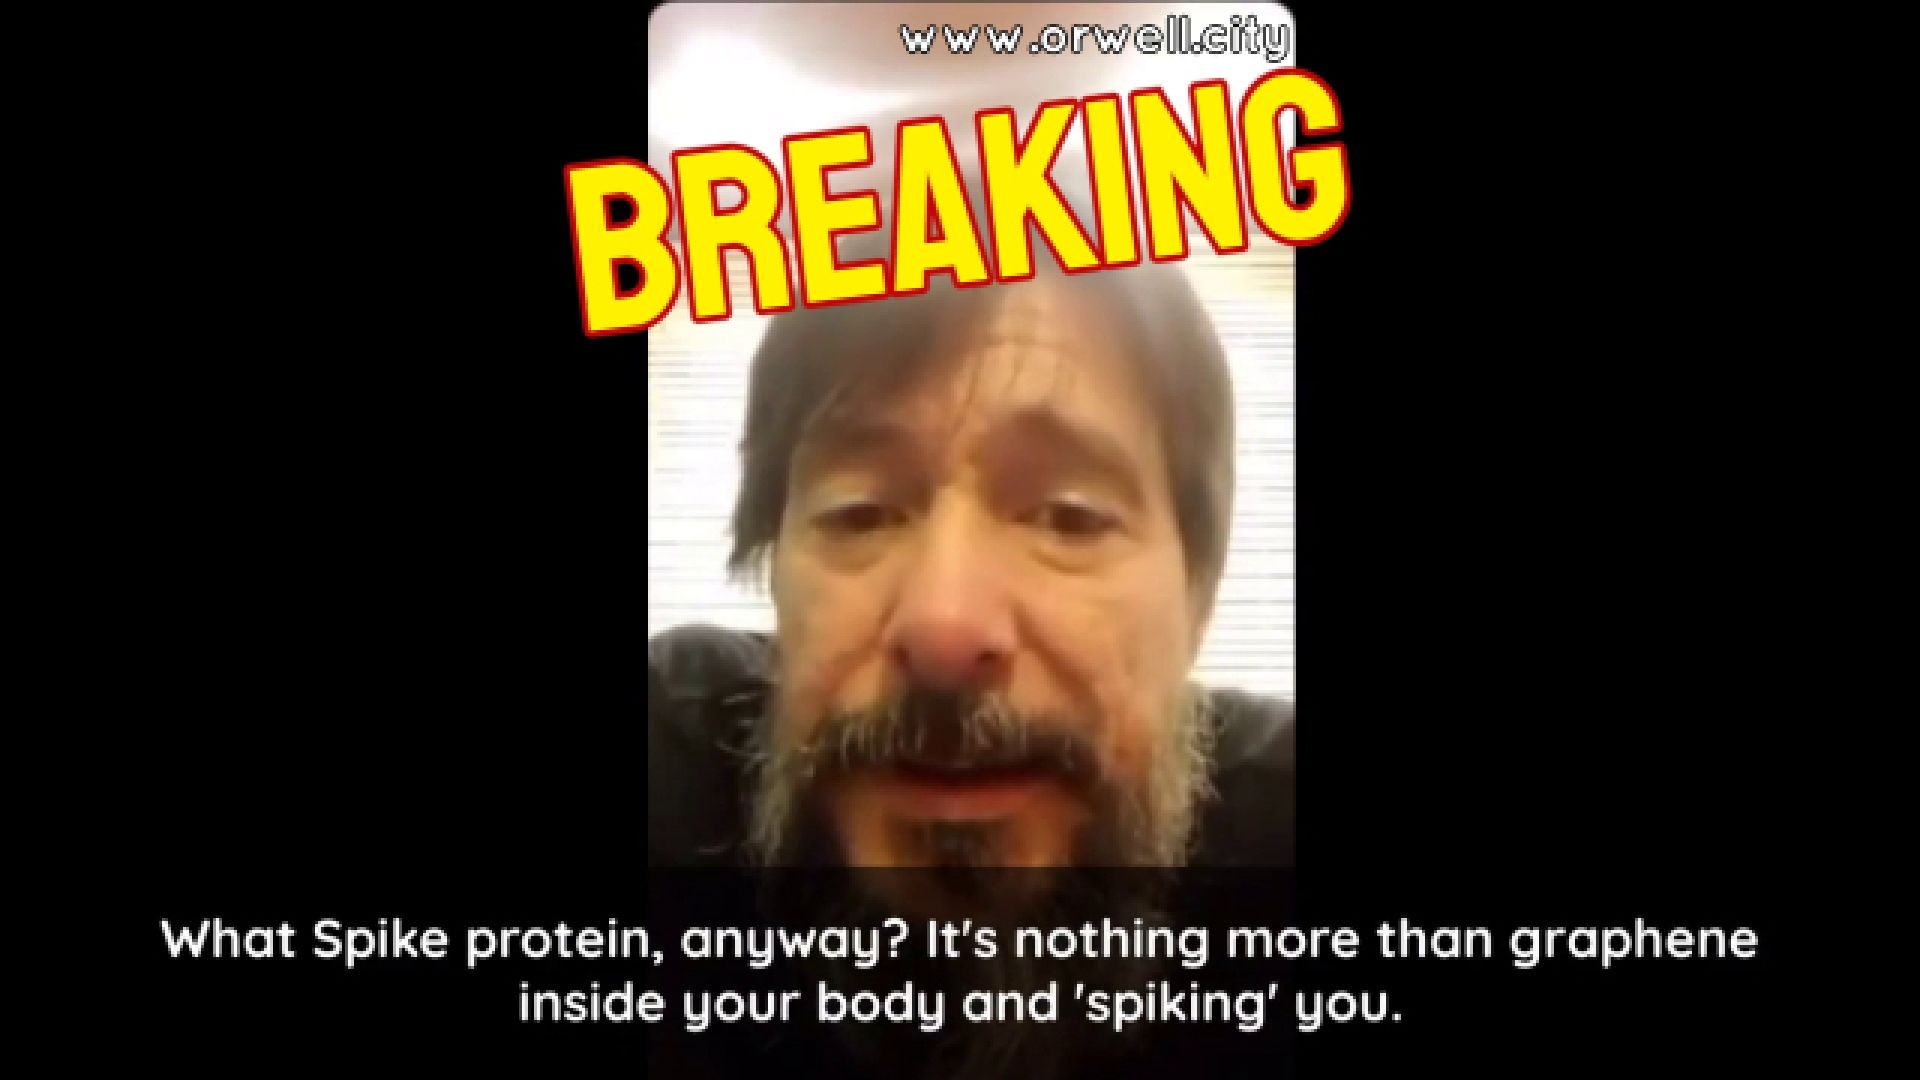 Dr. Luis Marcelo Martínez: The Spike Protein Is Nothing More Than Graphene Inside Your Body And Spik